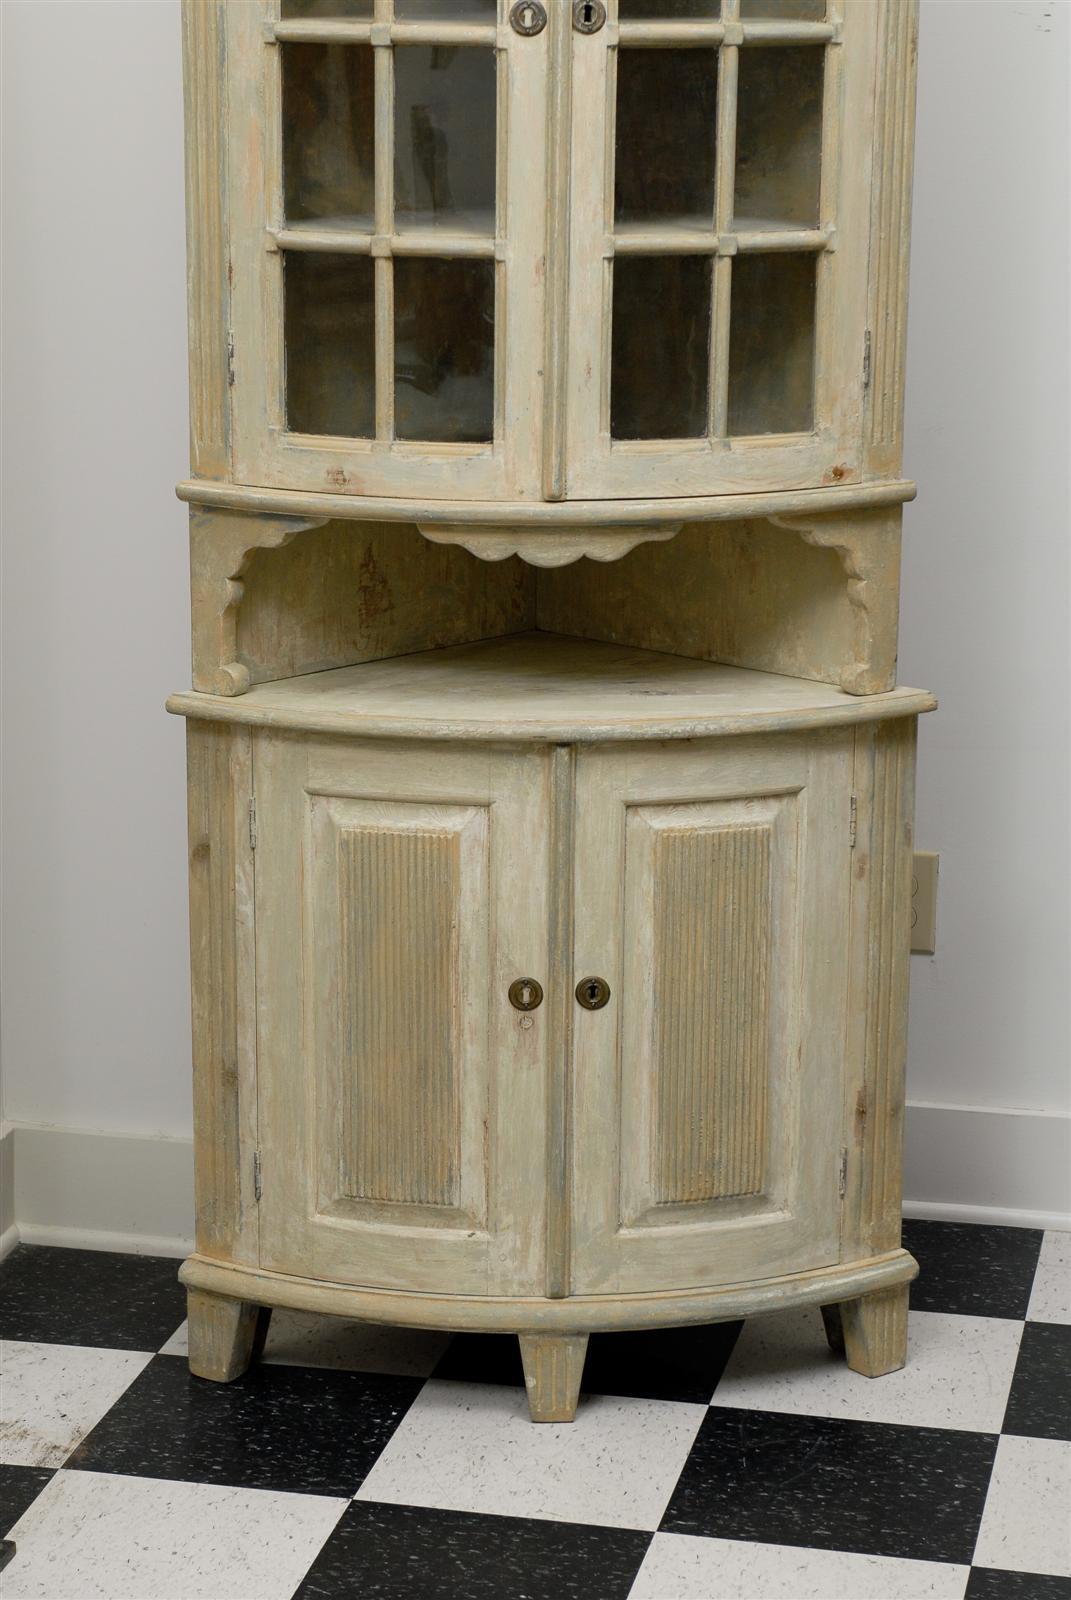 Painted Swedish Period Gustavian Rounded Corner Cabinet, Late 18th-Early 19th Century